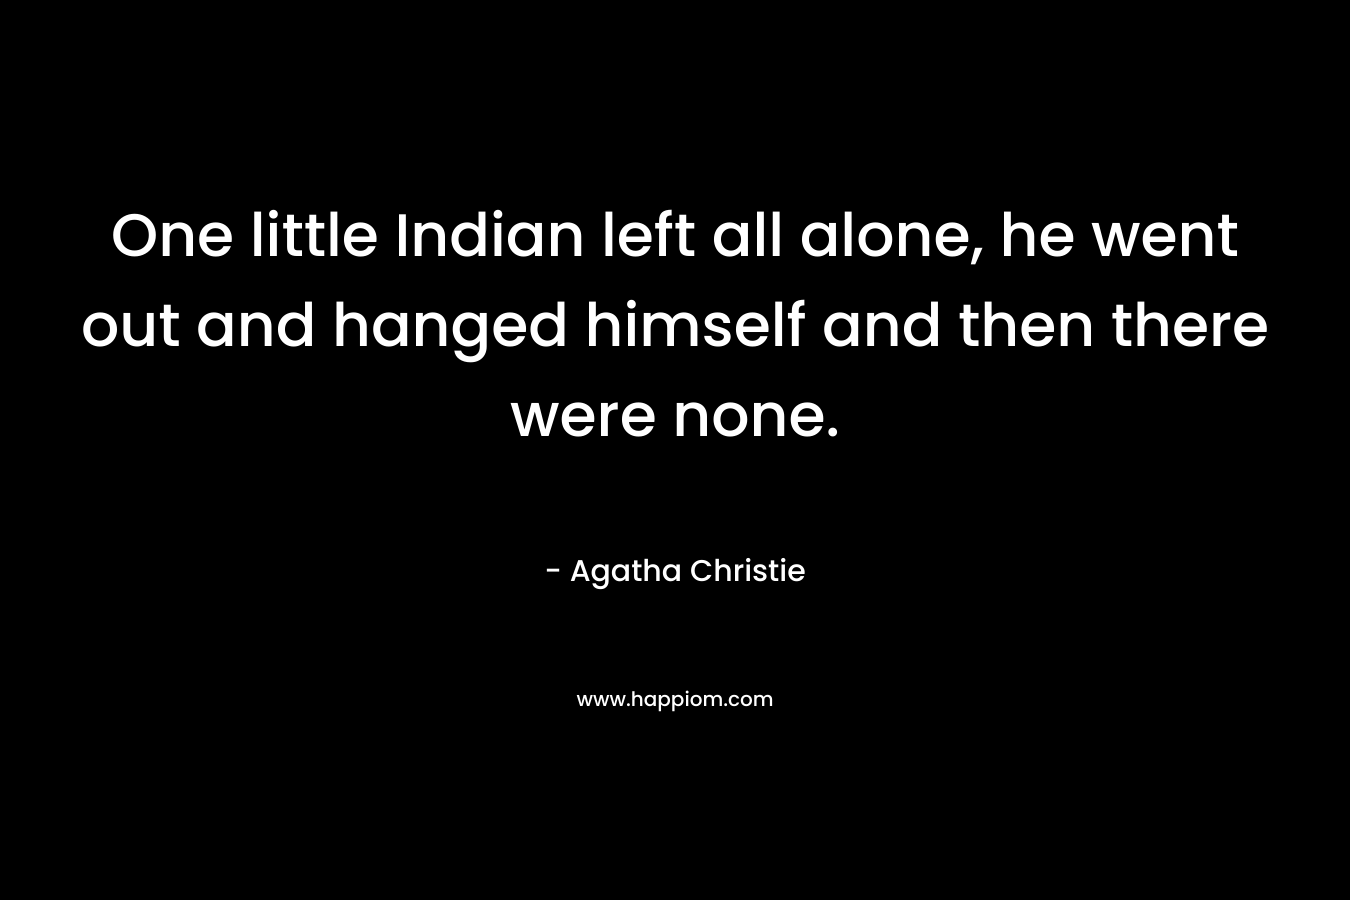 One little Indian left all alone, he went out and hanged himself and then there were none.